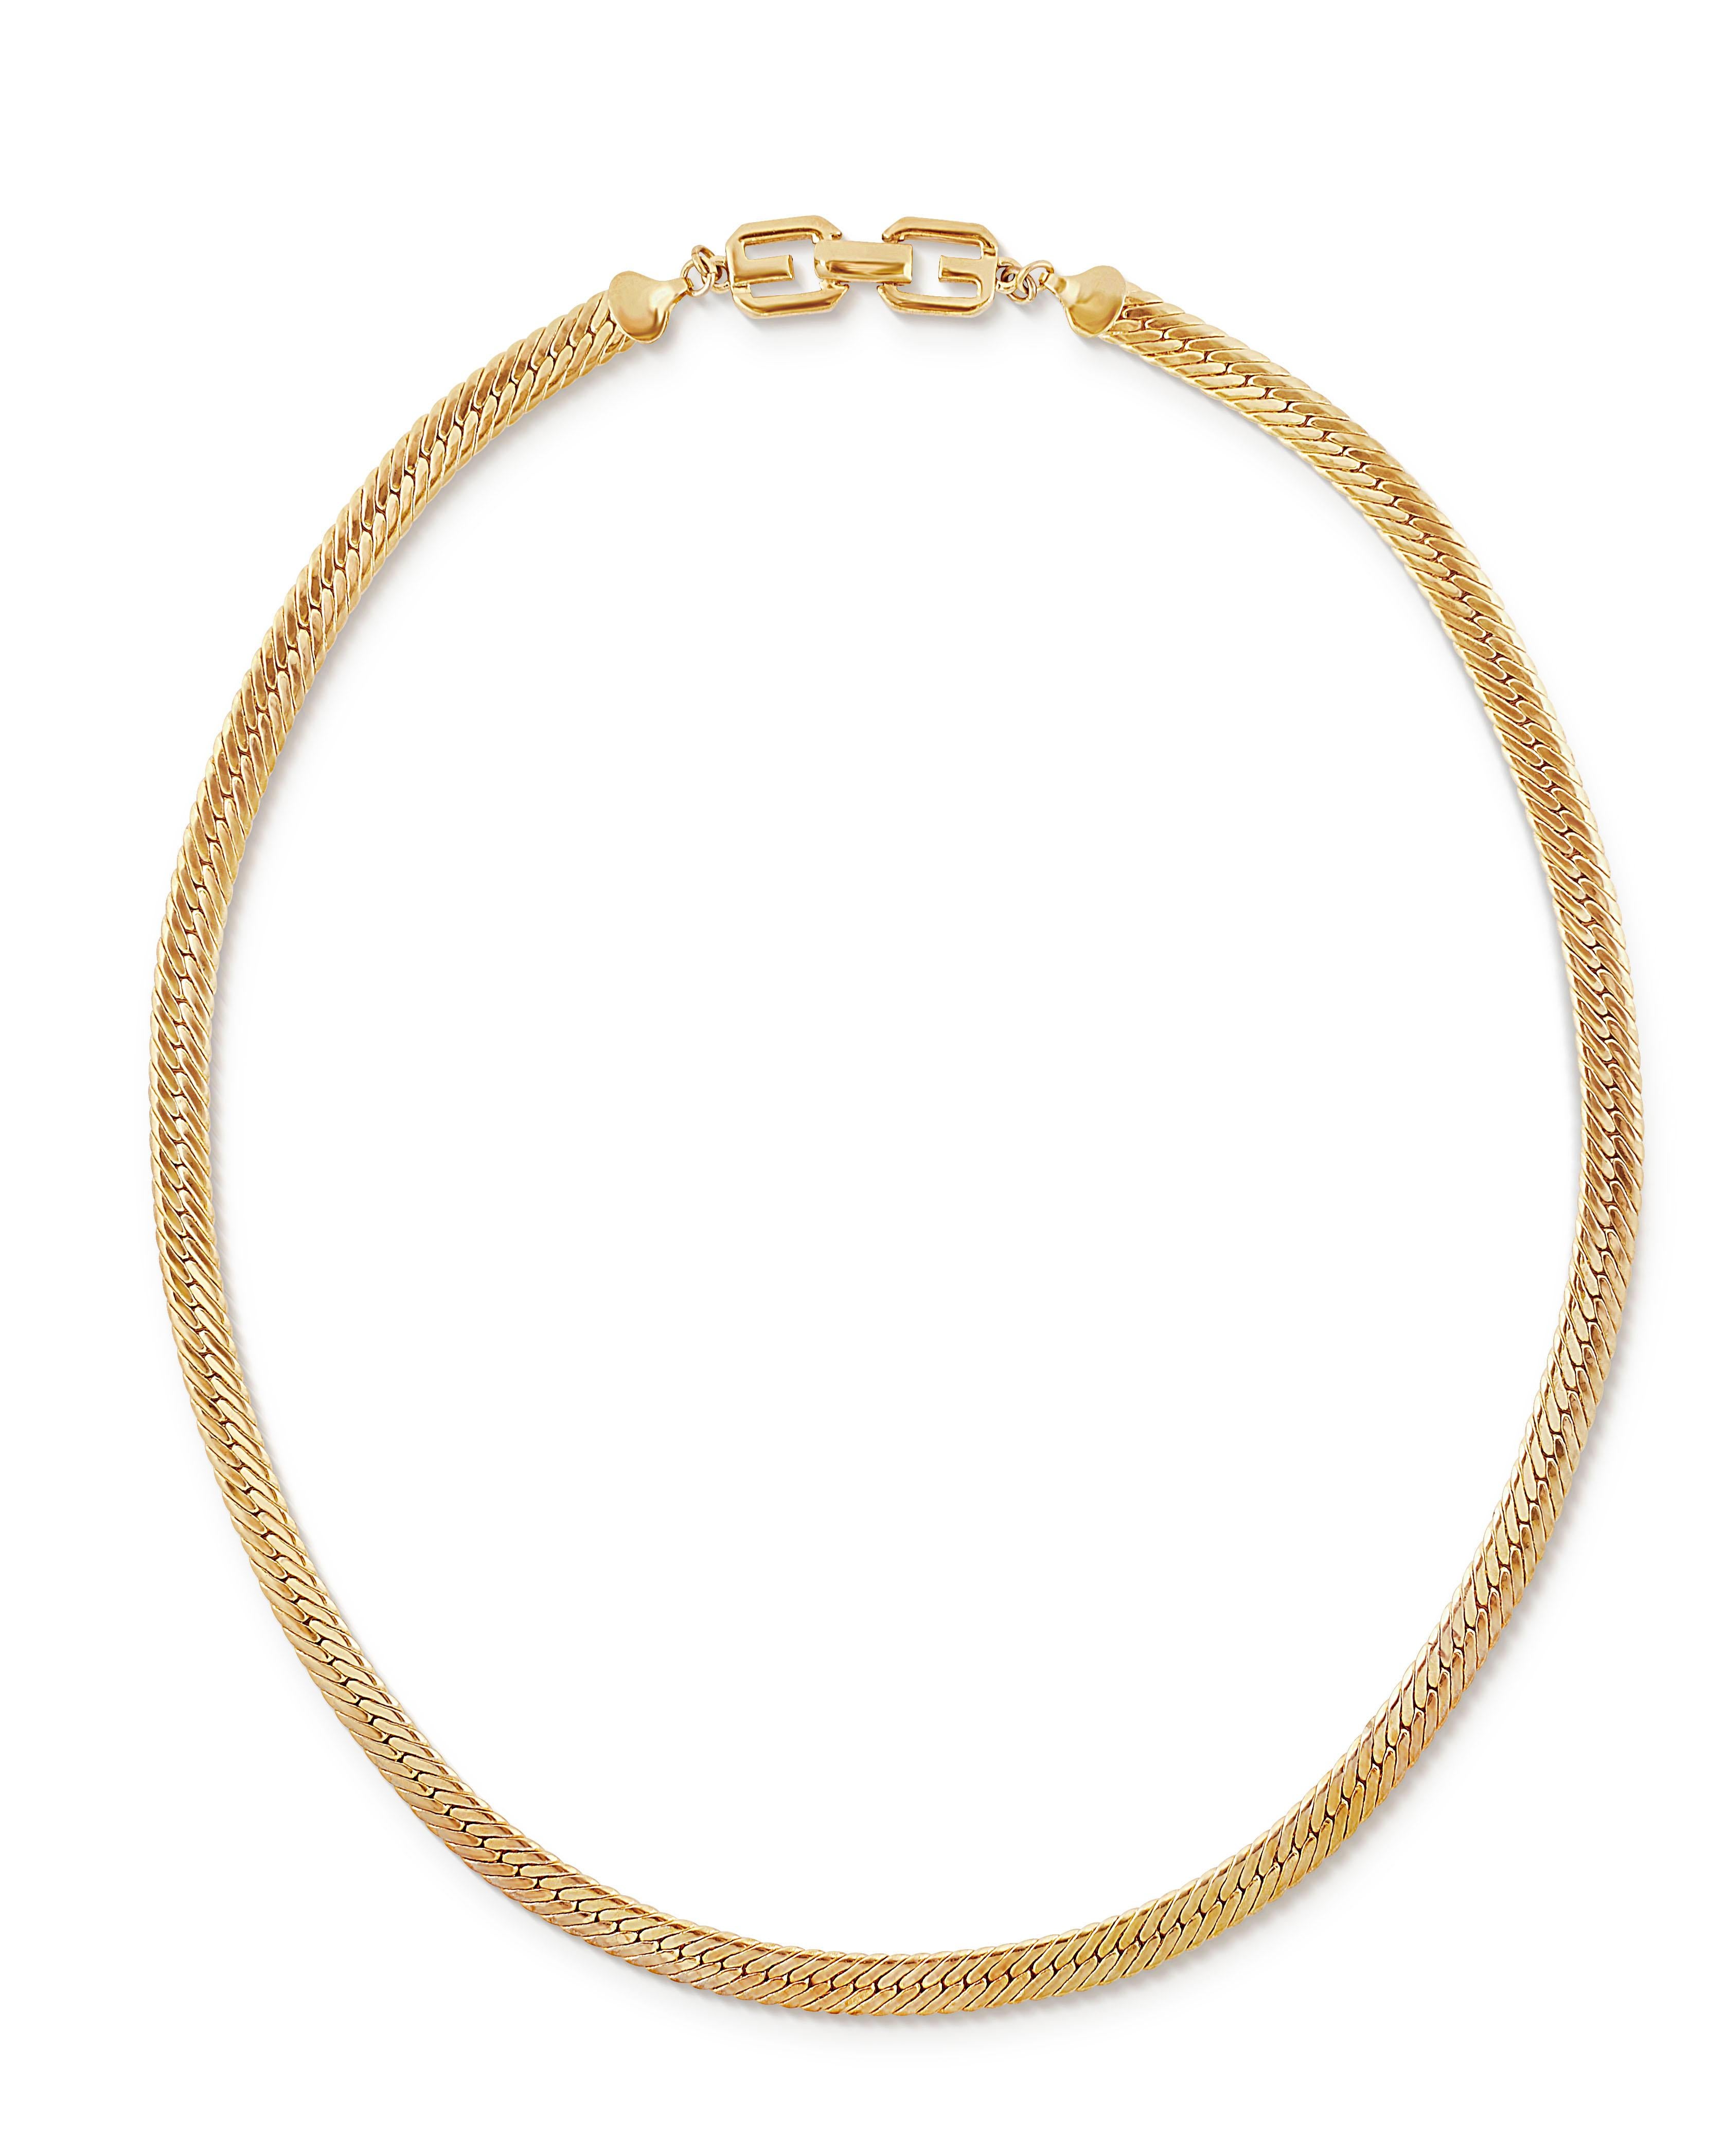 Vintage 1980s Givenchy herringbone chain necklace in gold plate.  This long heritage necklace comprises a flat, wide herringbone chain with a statement double G logo clasp.  Length 24 inches, width just over 1/4 inch with a foldover clasp closure at